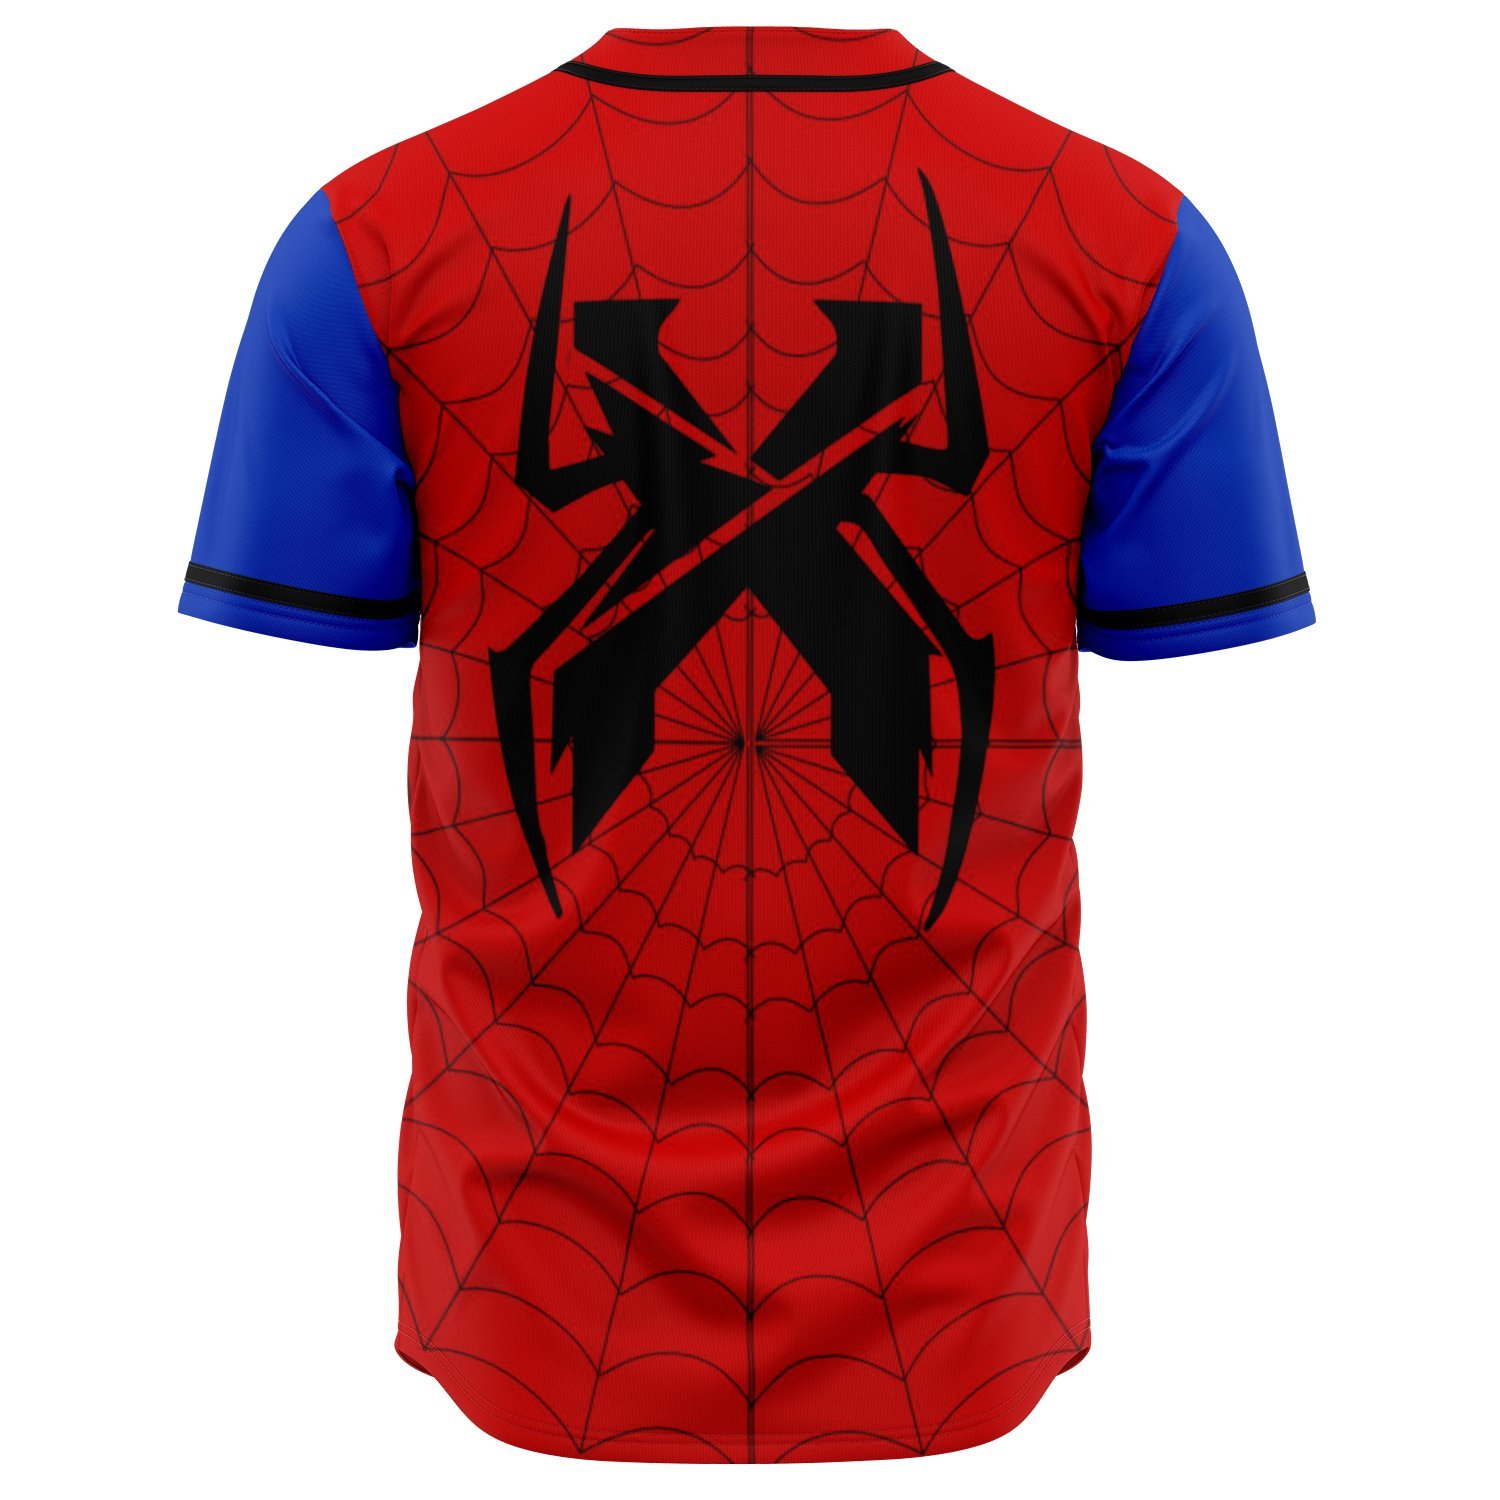 EXCISION x SPIDERMAN JERSEY - Jersey